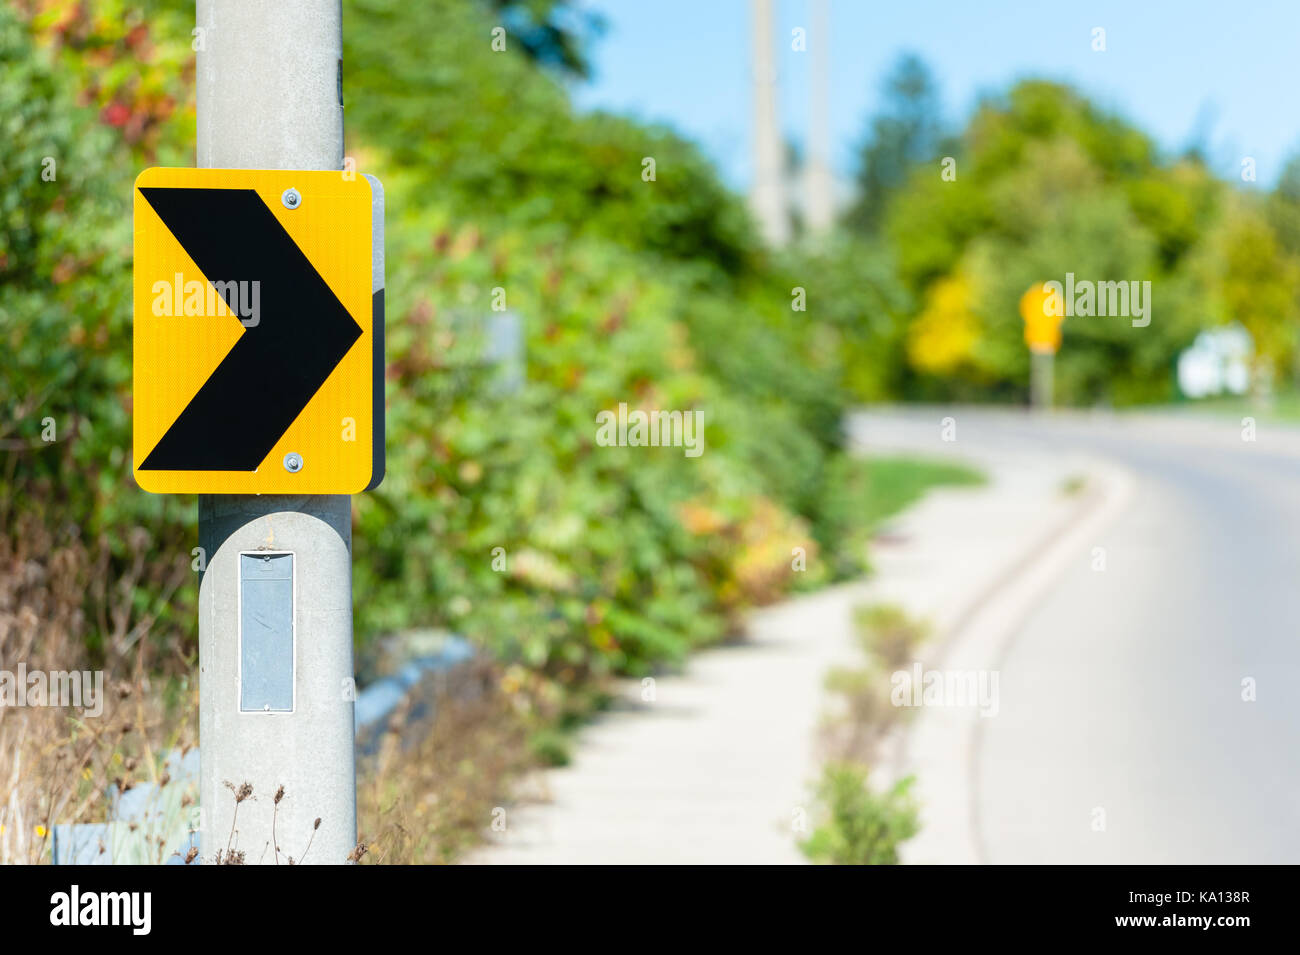 Black on yellow chevron road sign attached to post, indicating right turn against blurry curving road in background. Stock Photo